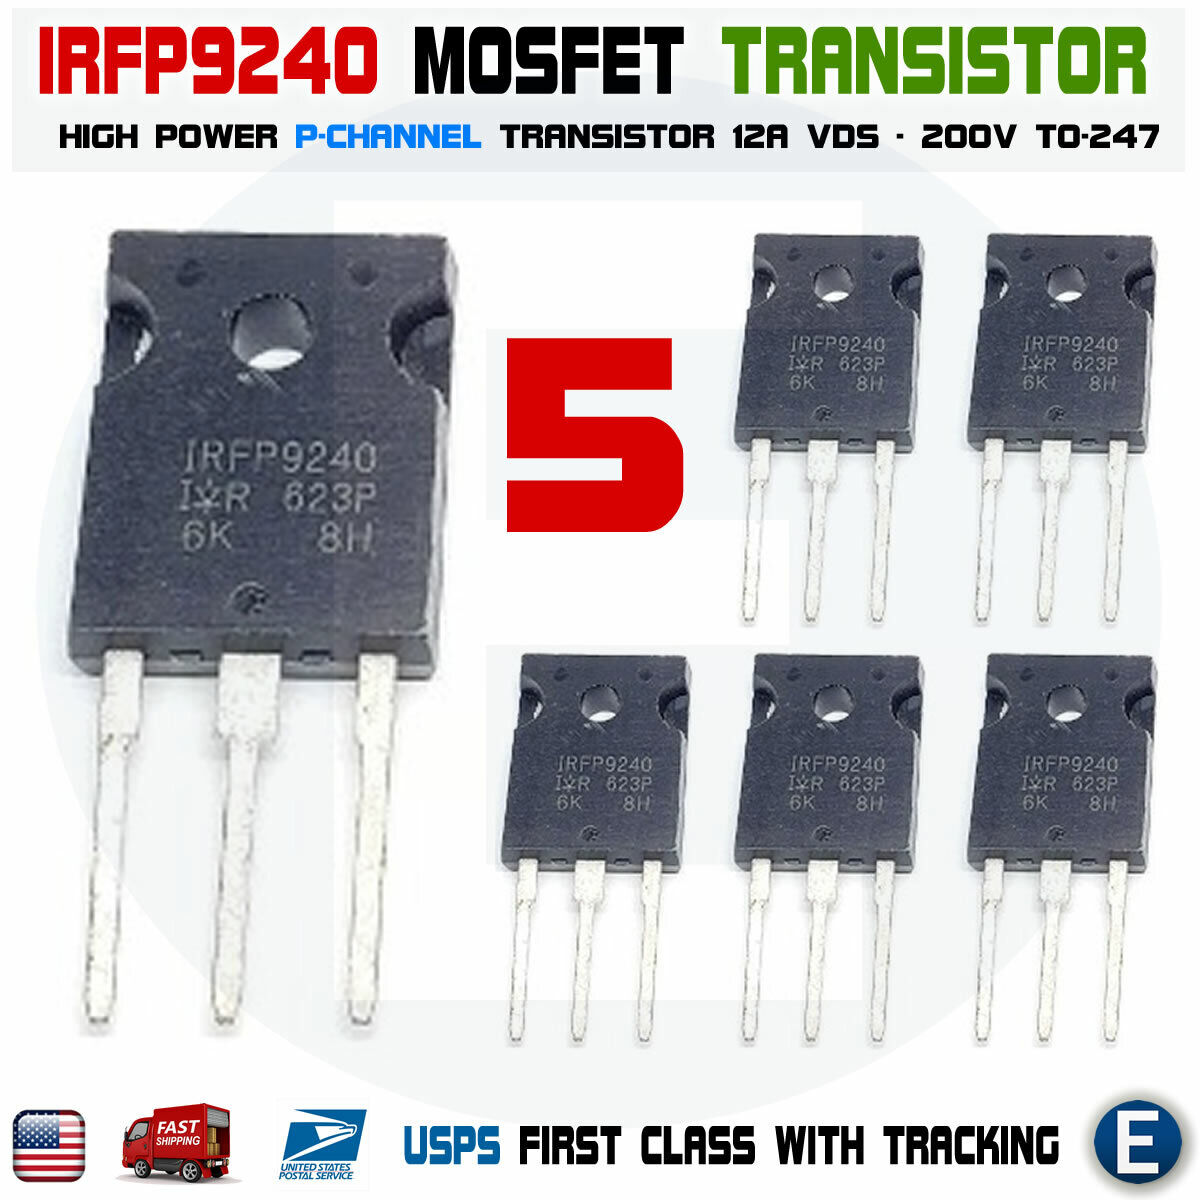 5PCS IRFP9240 MOSFET Transistor P-channel 12A 200V TO-247 Power USA